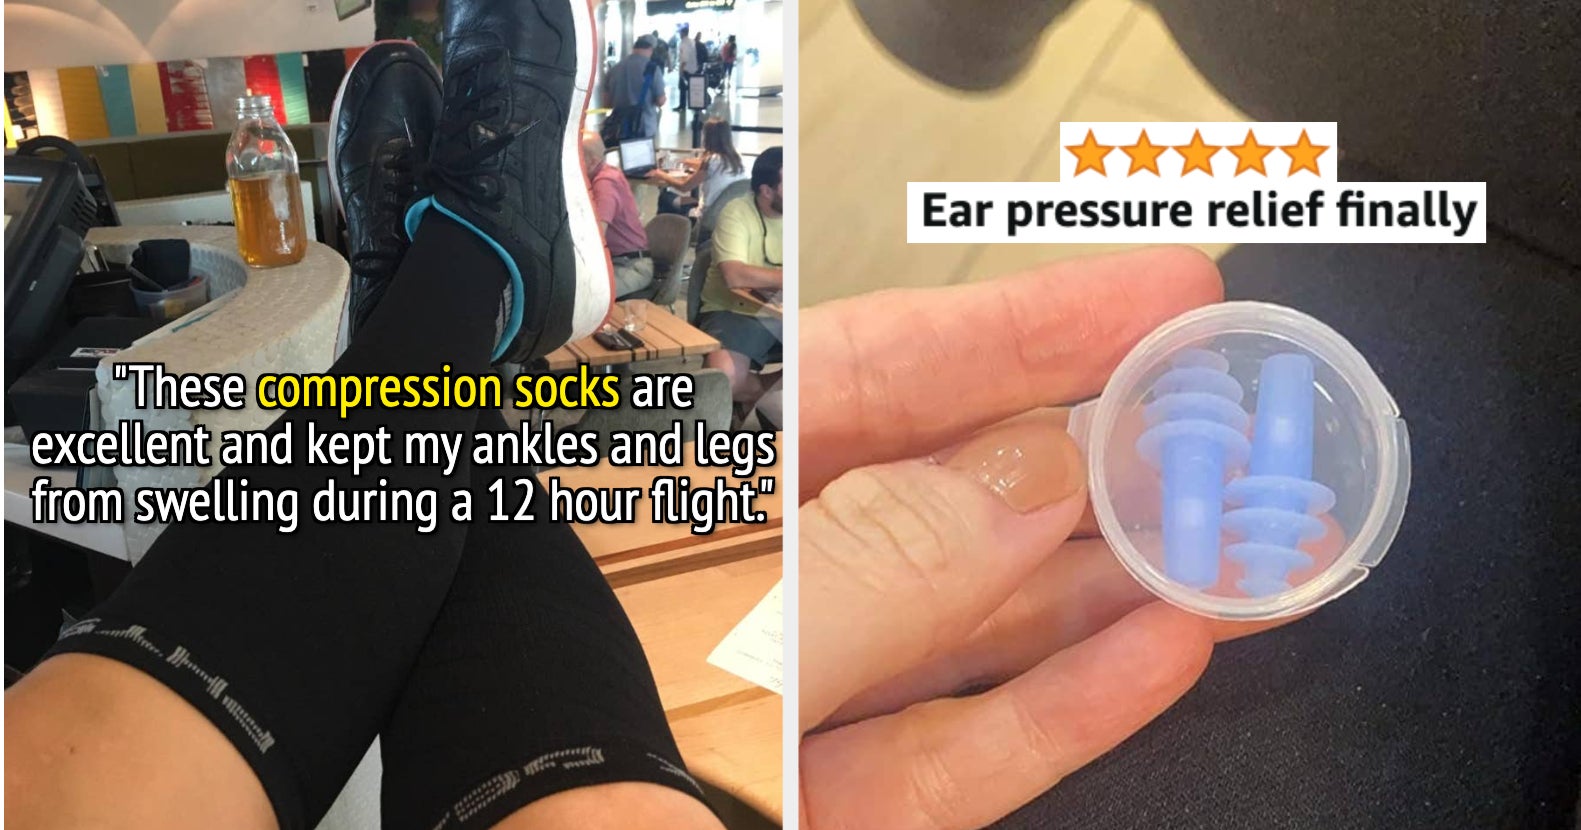 33 Things To Bring With You On That 10+ Hour Flight You Have This Summer